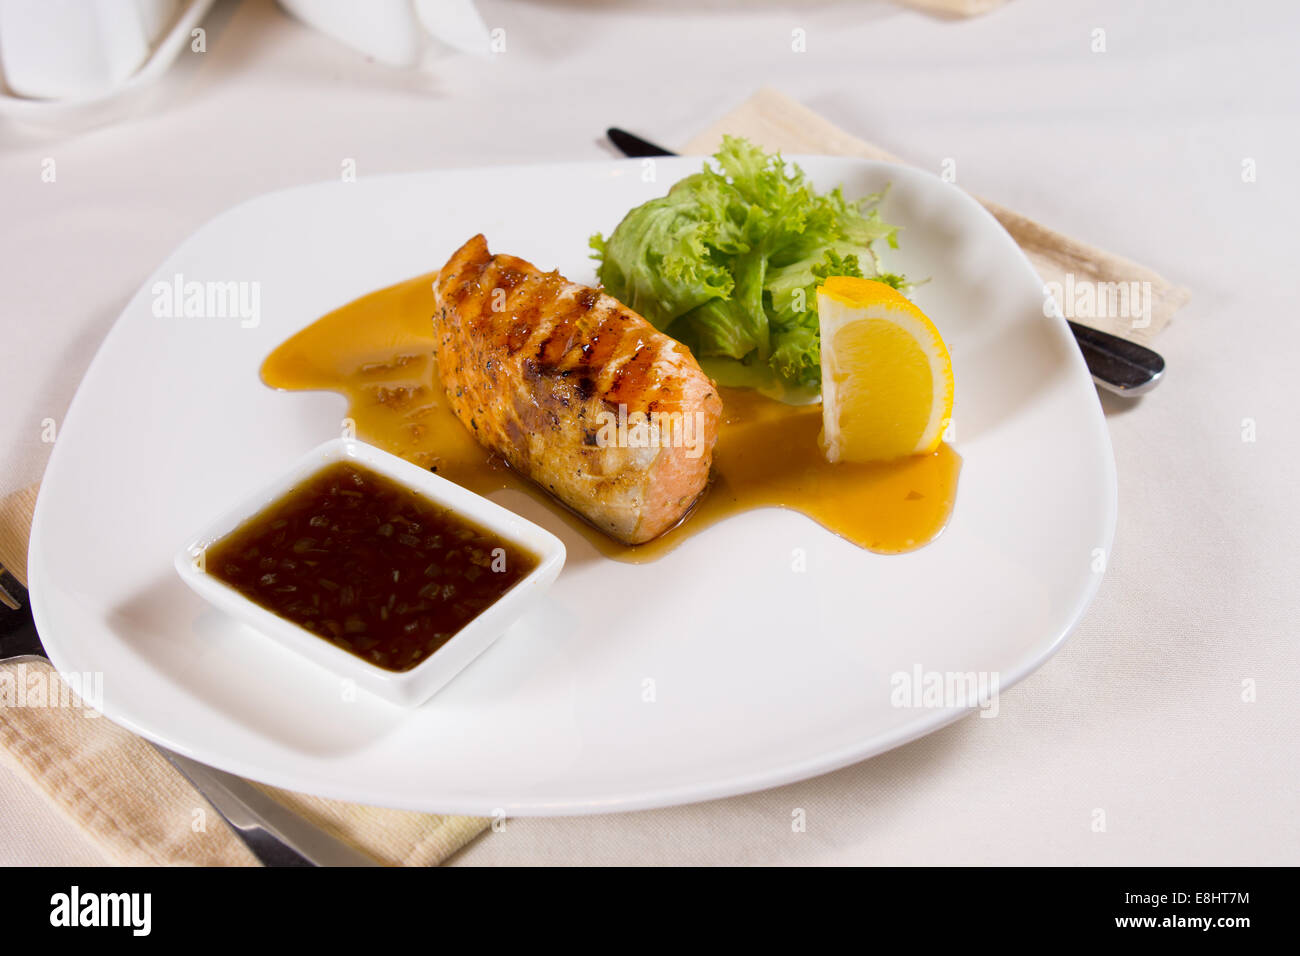 Plated Meal of Grilled Fish with Garnishes at Restaurant Place Setting Stock Photo